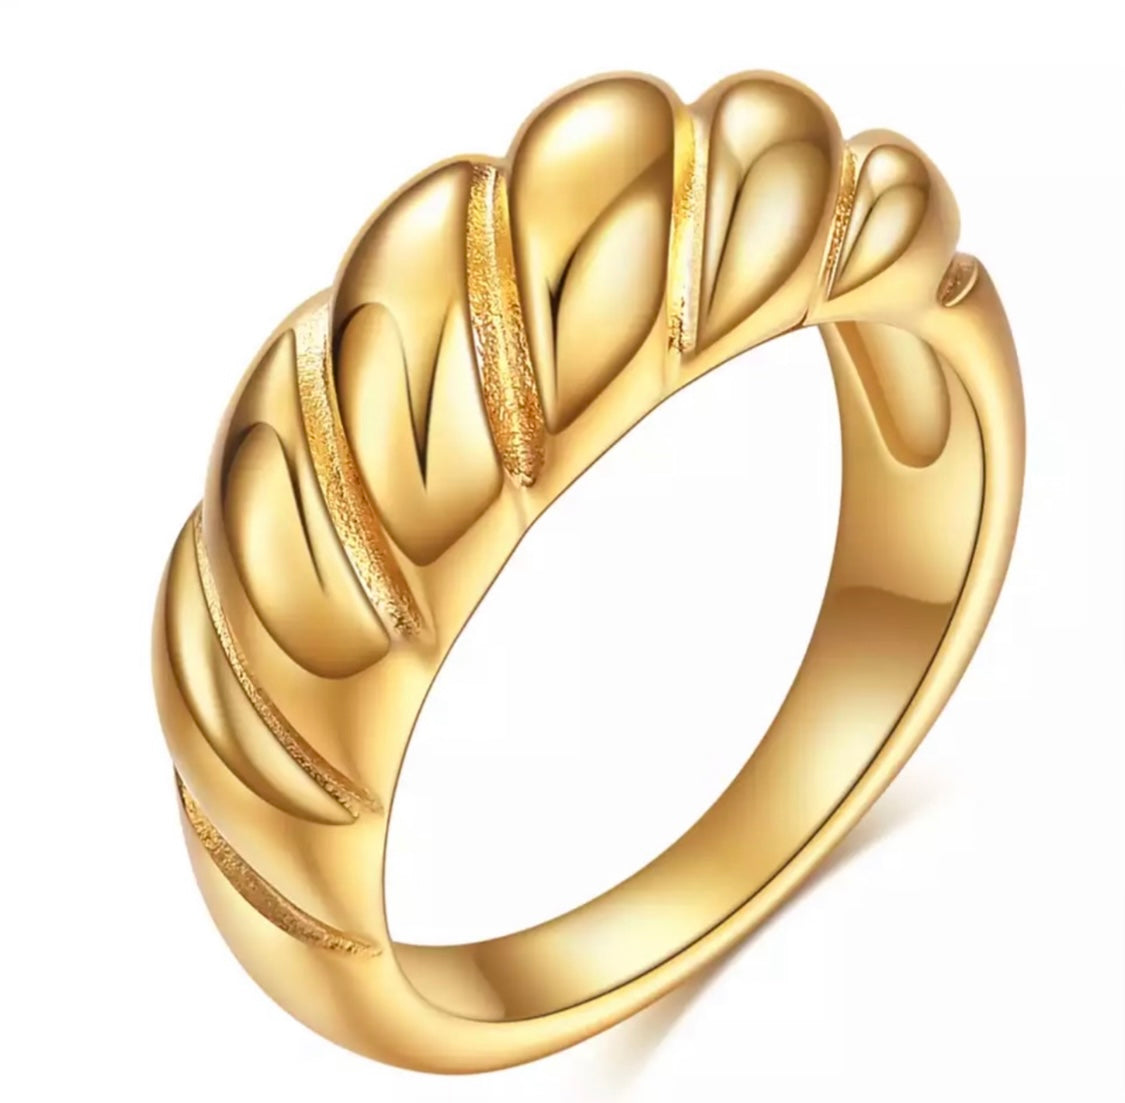 Paige Ring (24K Gold)